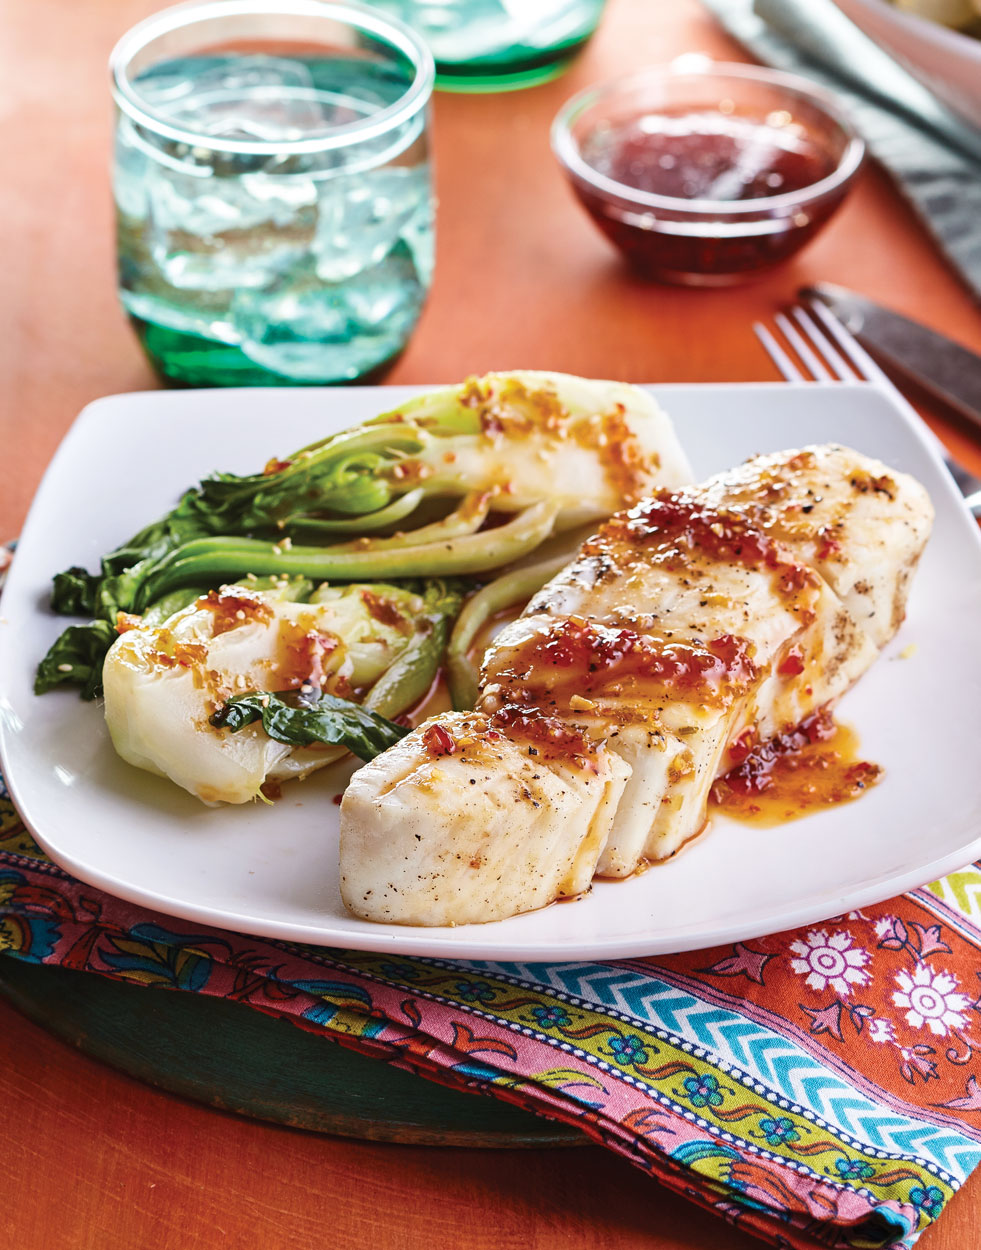 Red Pepper Jelly-Glazed Halibut